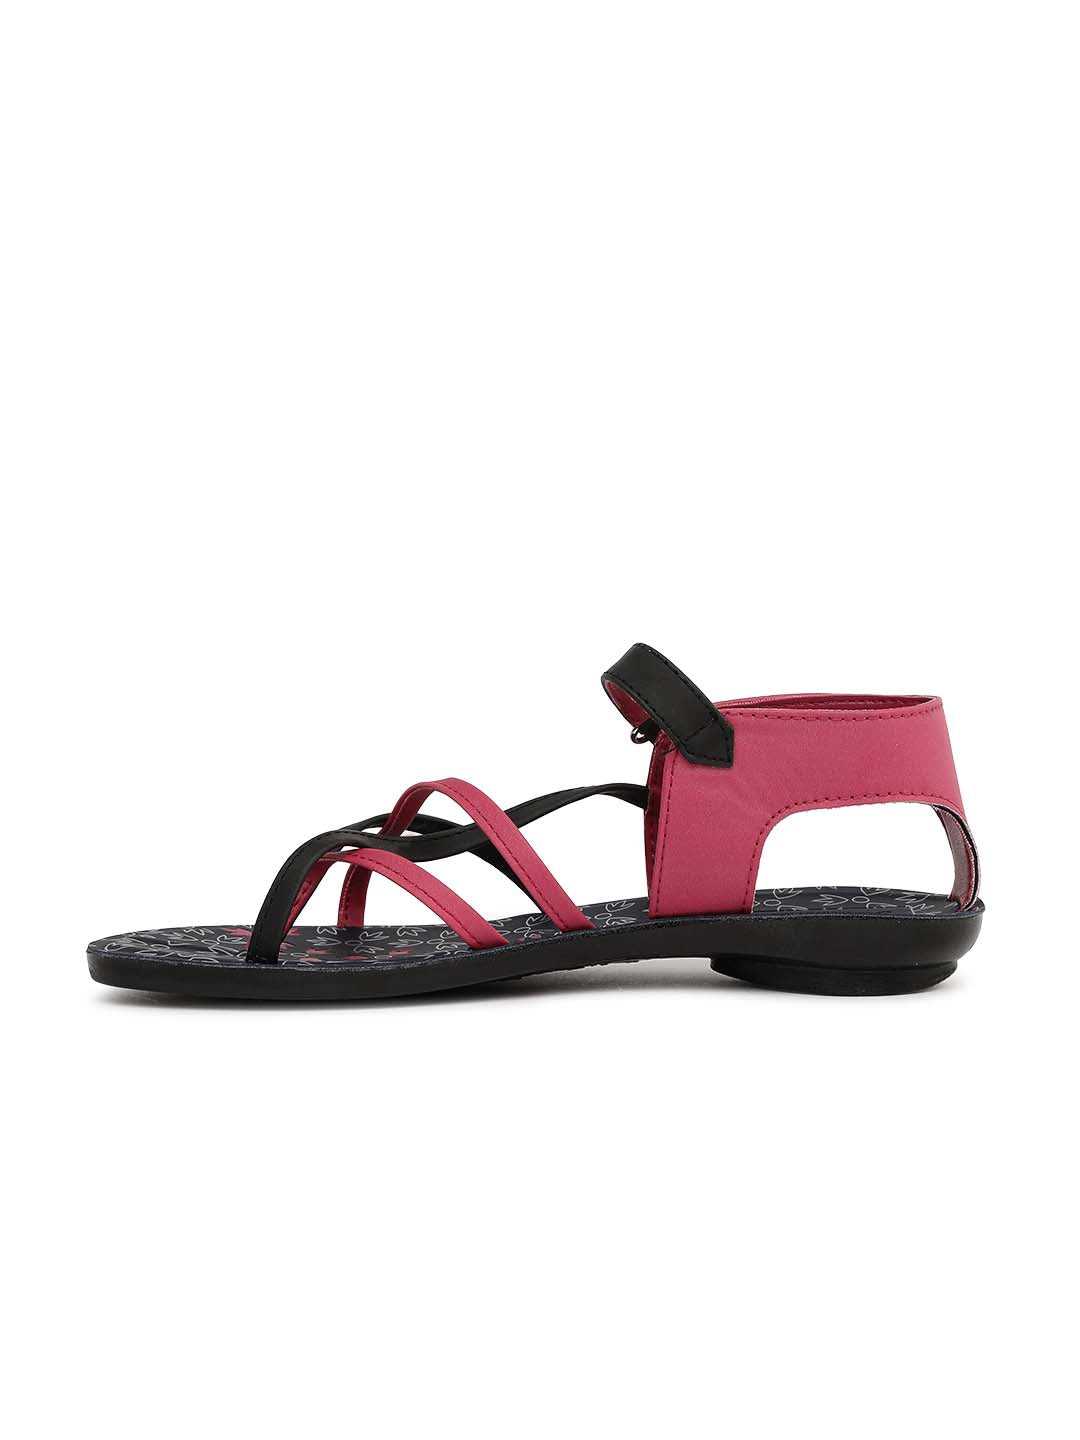 Paragon  PU7125L Women Sandals | Casual &amp; Formal Sandals | Stylish, Comfortable &amp; Durable | For Daily &amp; Occasion Wear